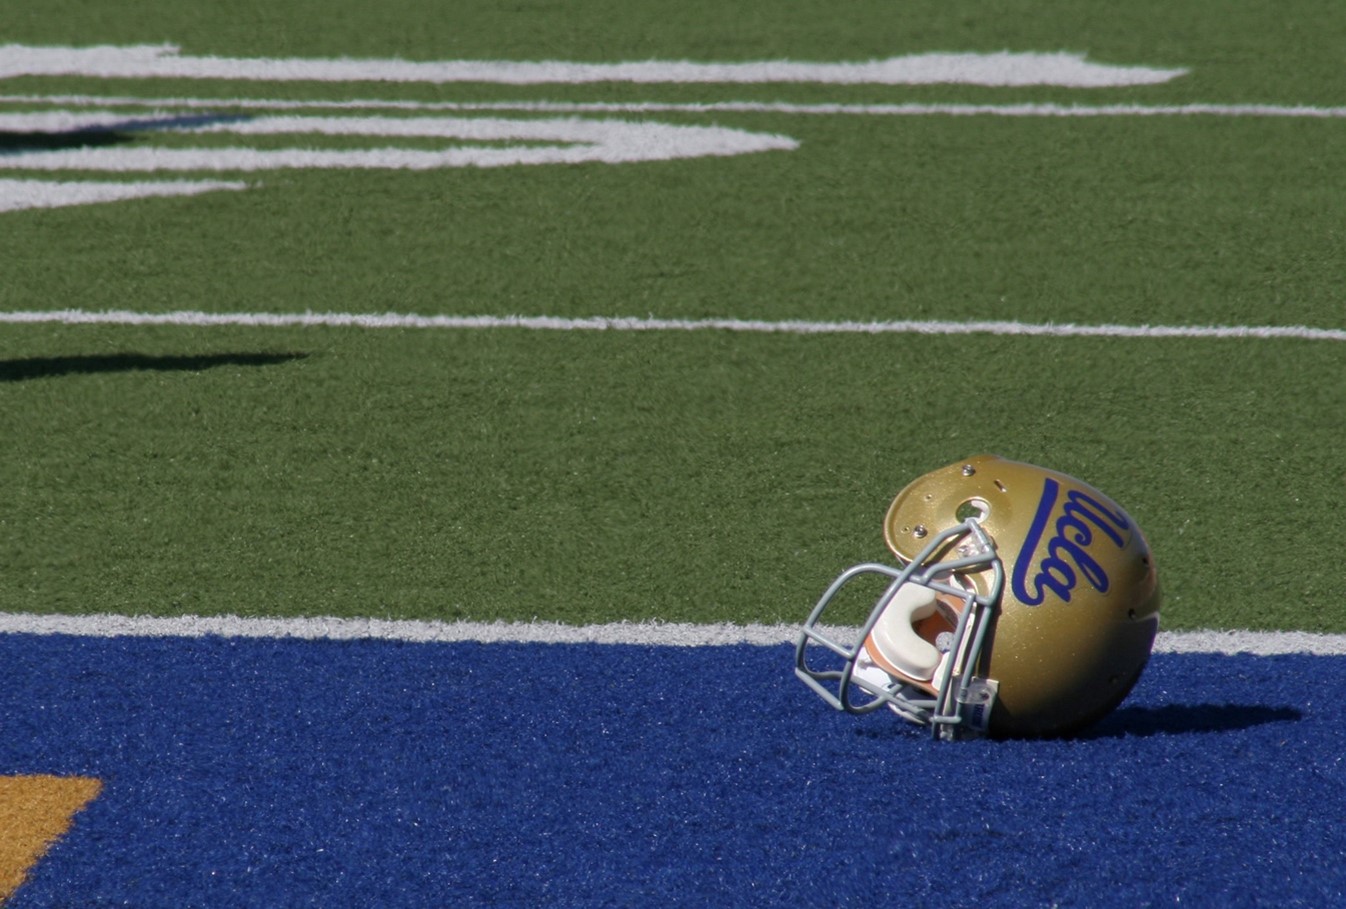 UCLA helmet laying in endzone on a football field